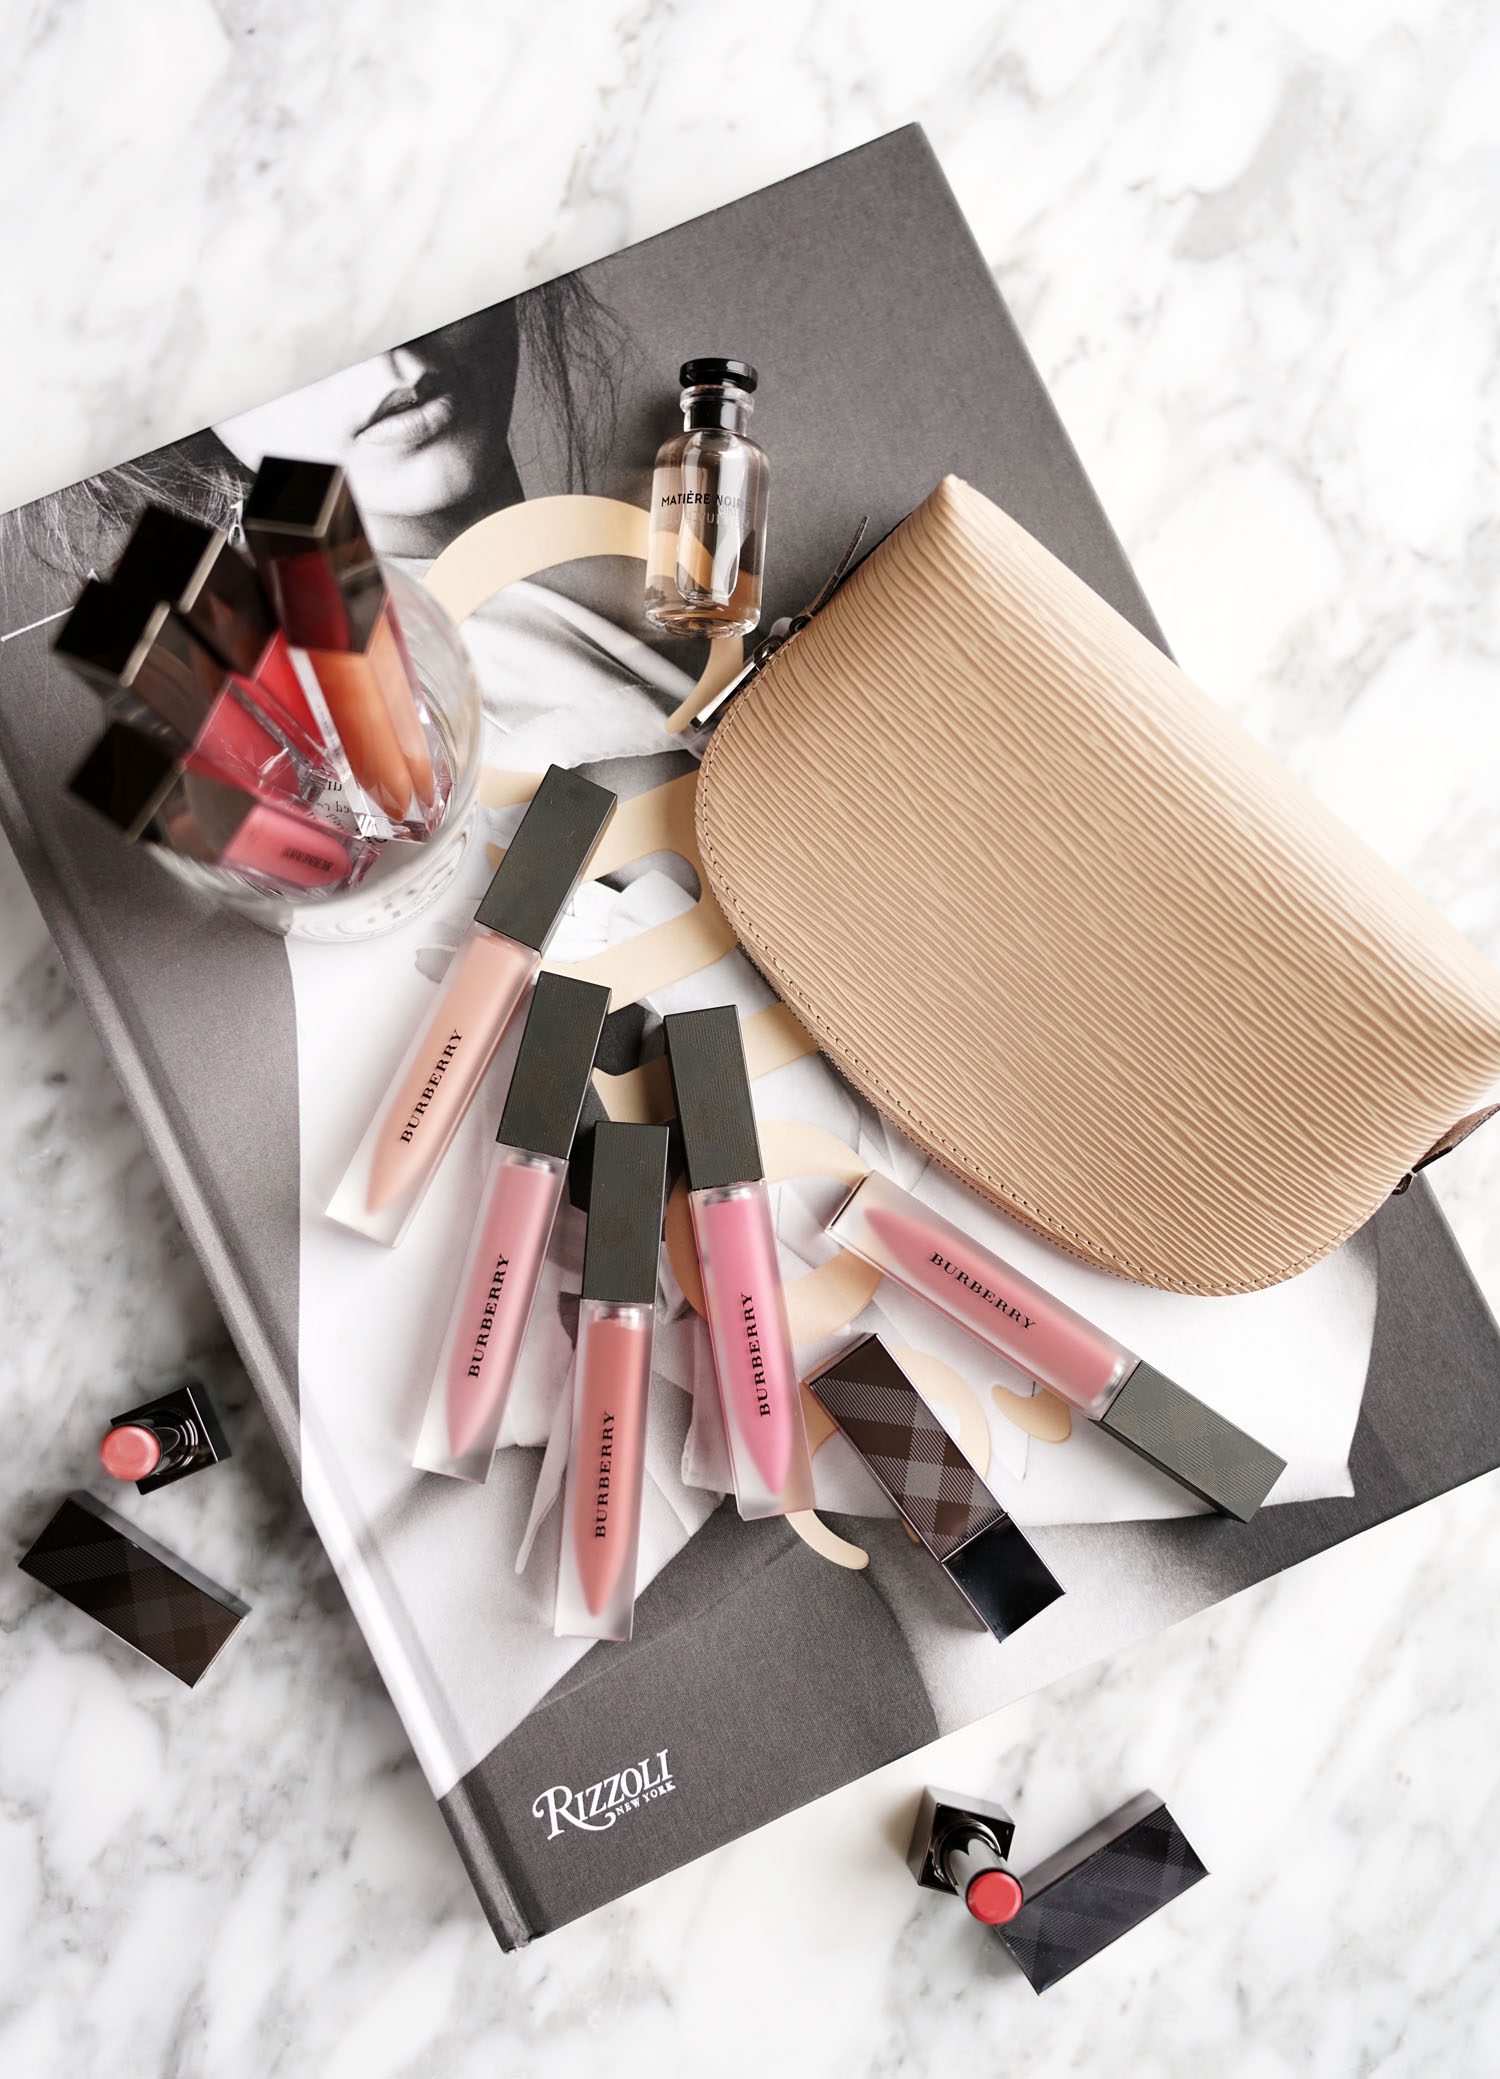 Burberry Beauty Lip Velvet Review - The Beauty Look Book